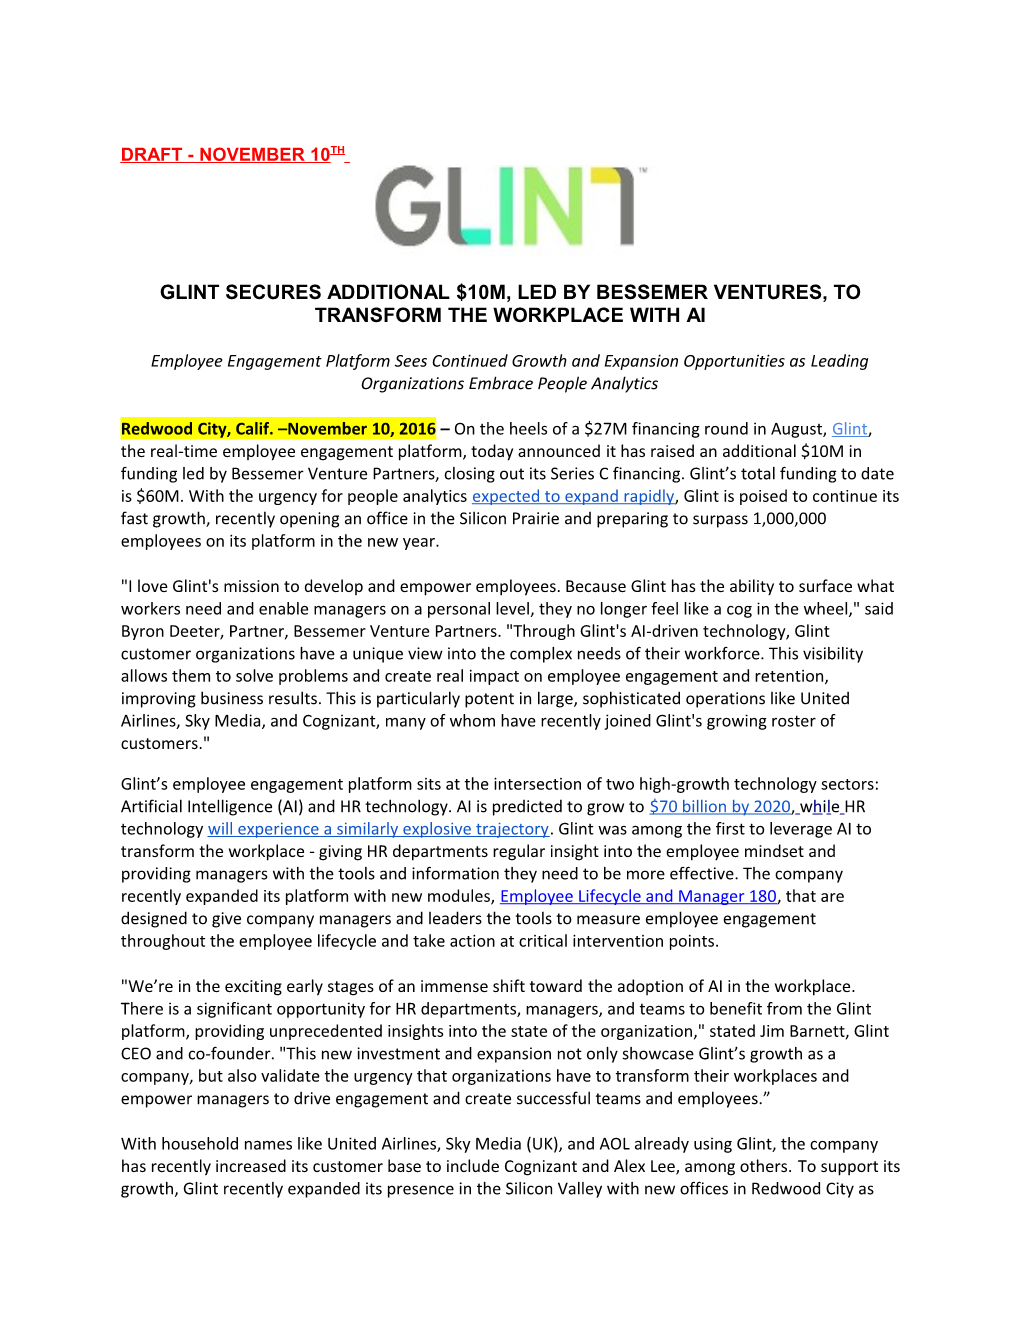 Glint Secures Additional $10M, Led by Bessemer Ventures, to Transform the Workplace with Ai